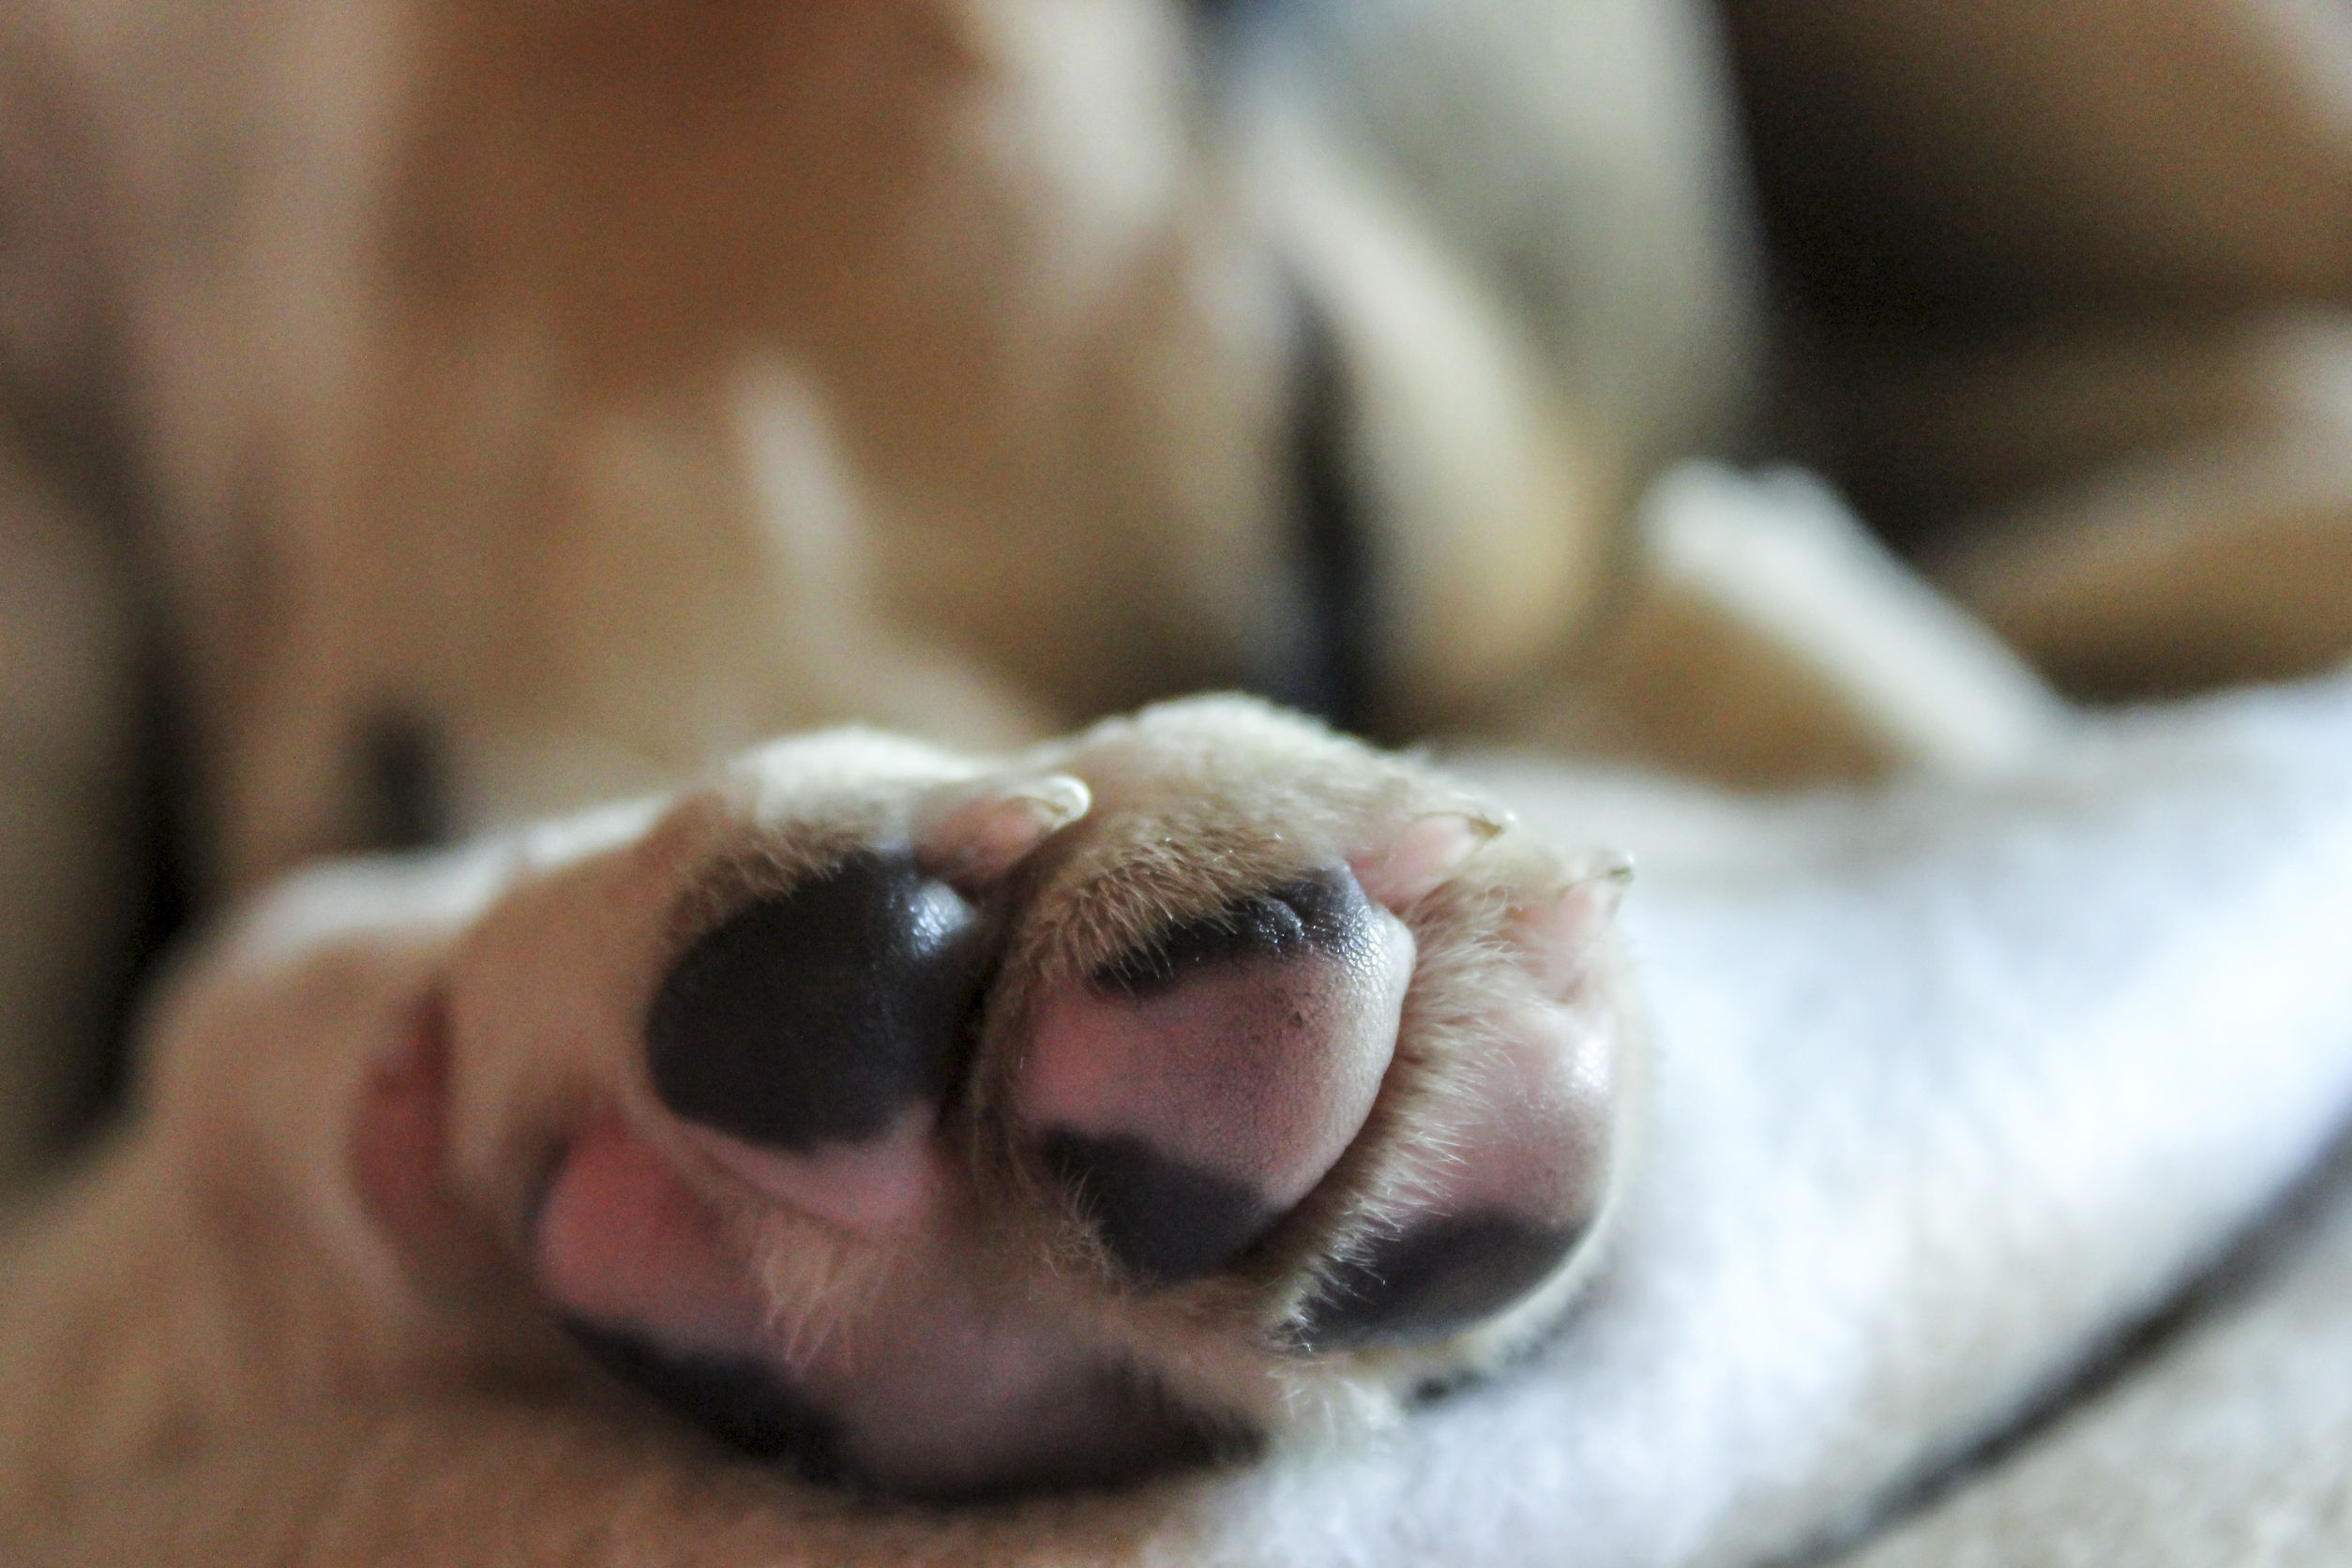 How to Treat Paws | HealthyPets